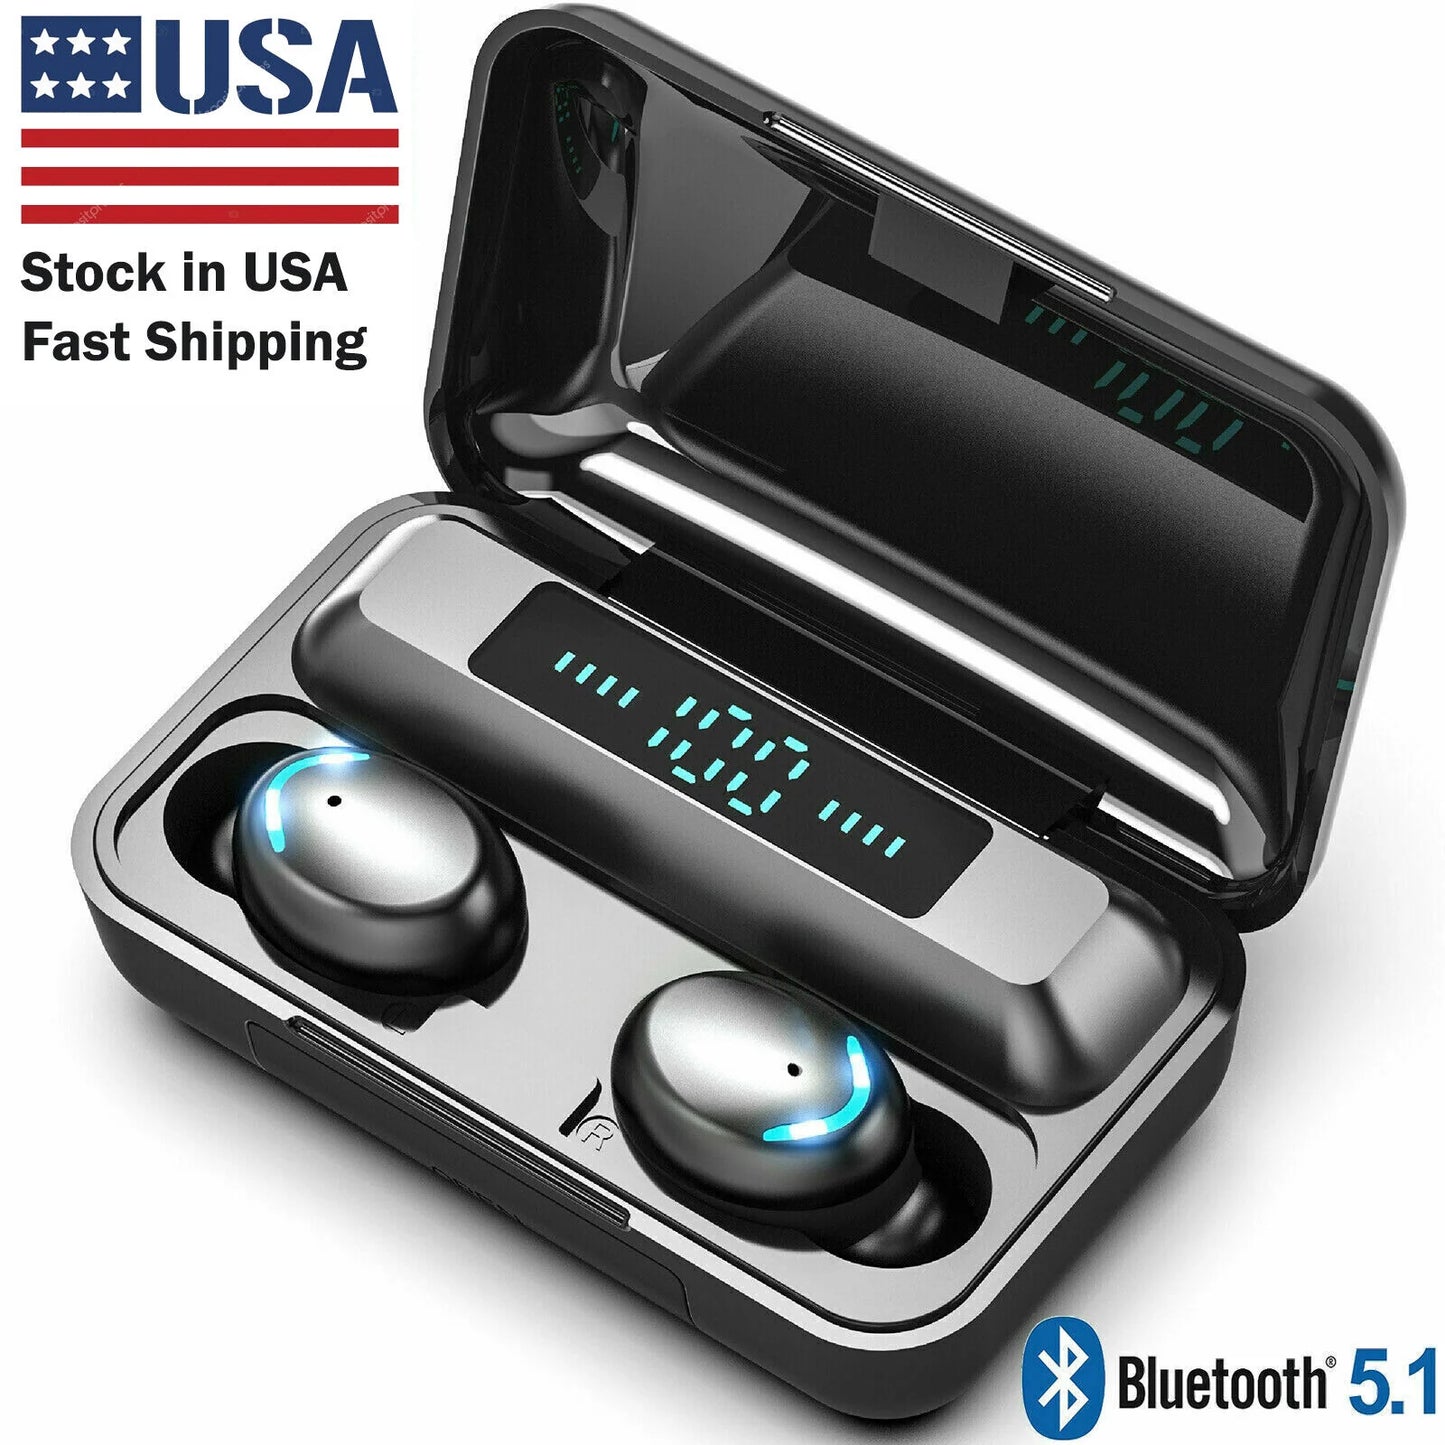 "Ultimate Wireless Bluetooth Earbuds - Enjoy Crystal Clear Audio on Any Device, Anywhere, Anytime!"